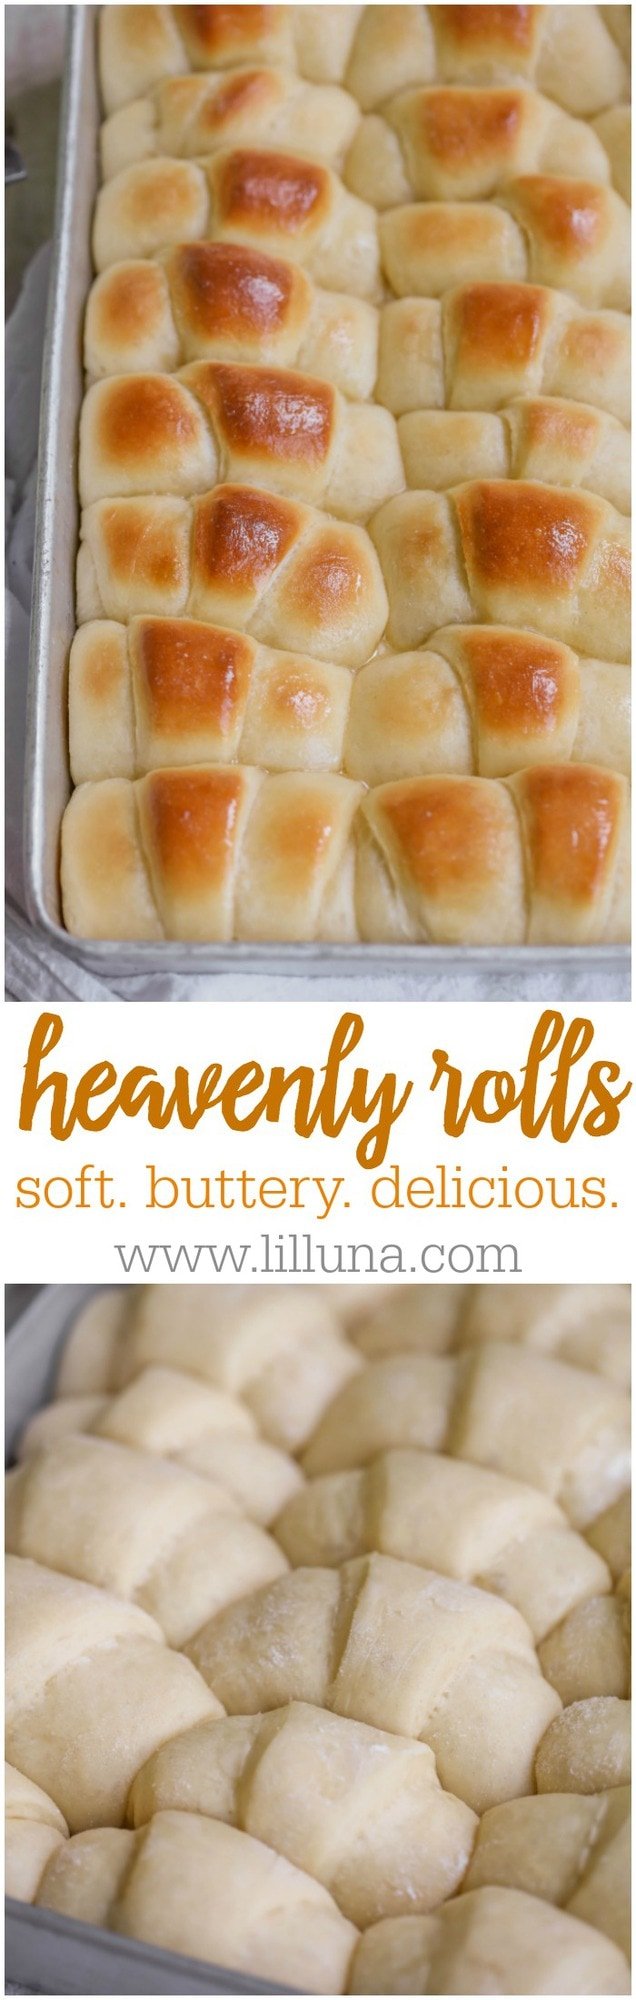 All-time Favorite Rolls Recipe - so soft, buttery and delicious. It's a family favorite!